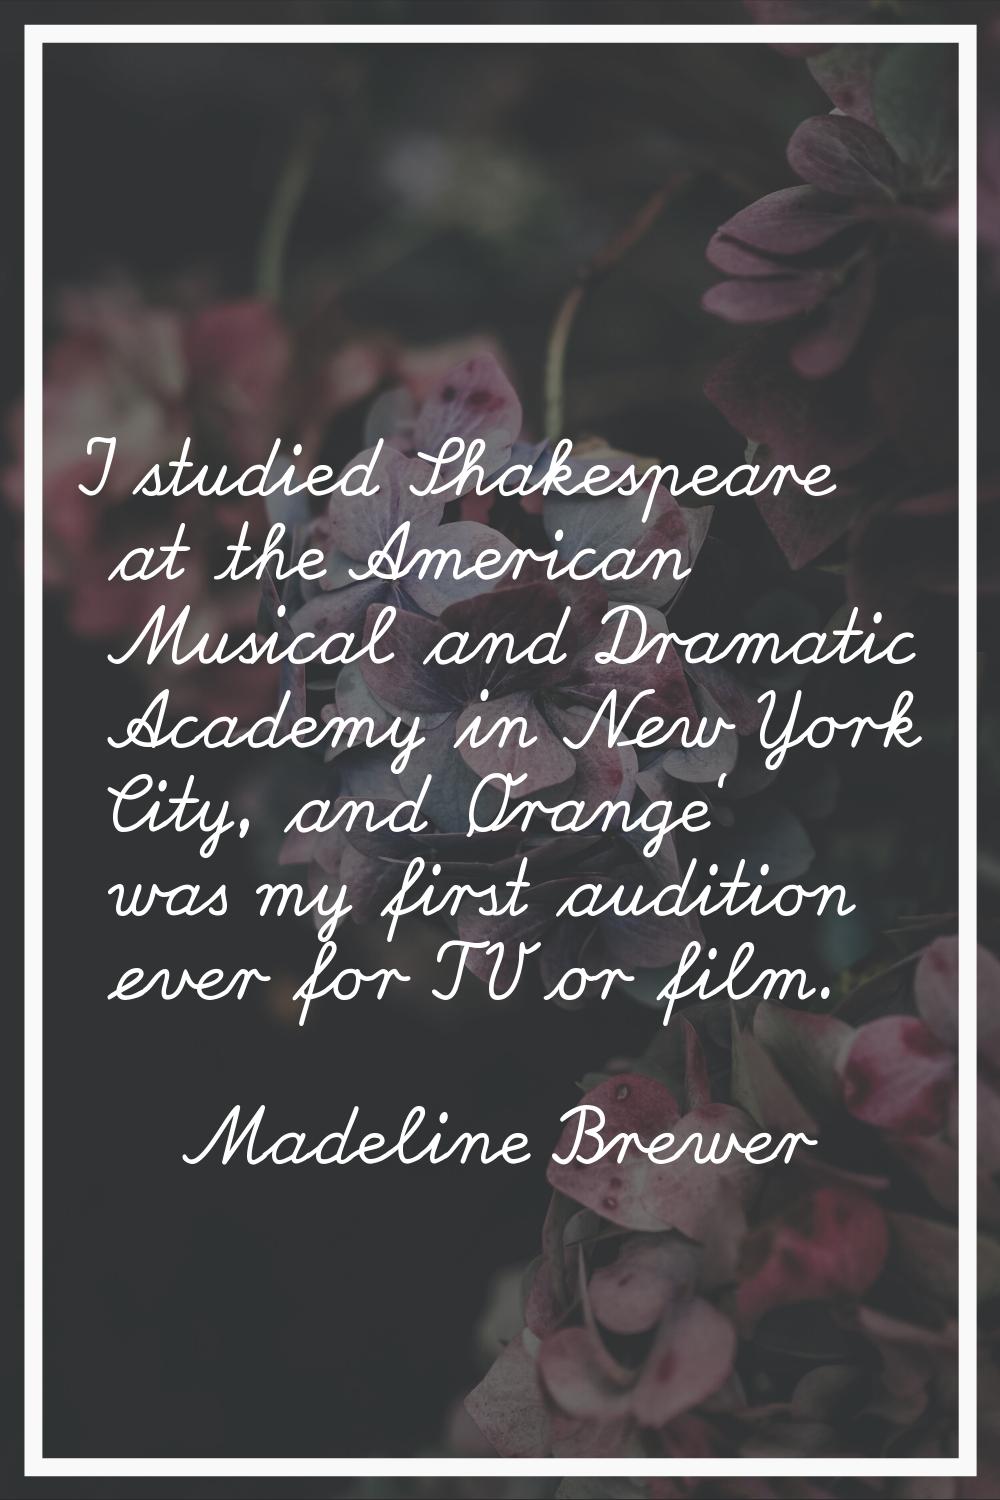 I studied Shakespeare at the American Musical and Dramatic Academy in New York City, and 'Orange' w